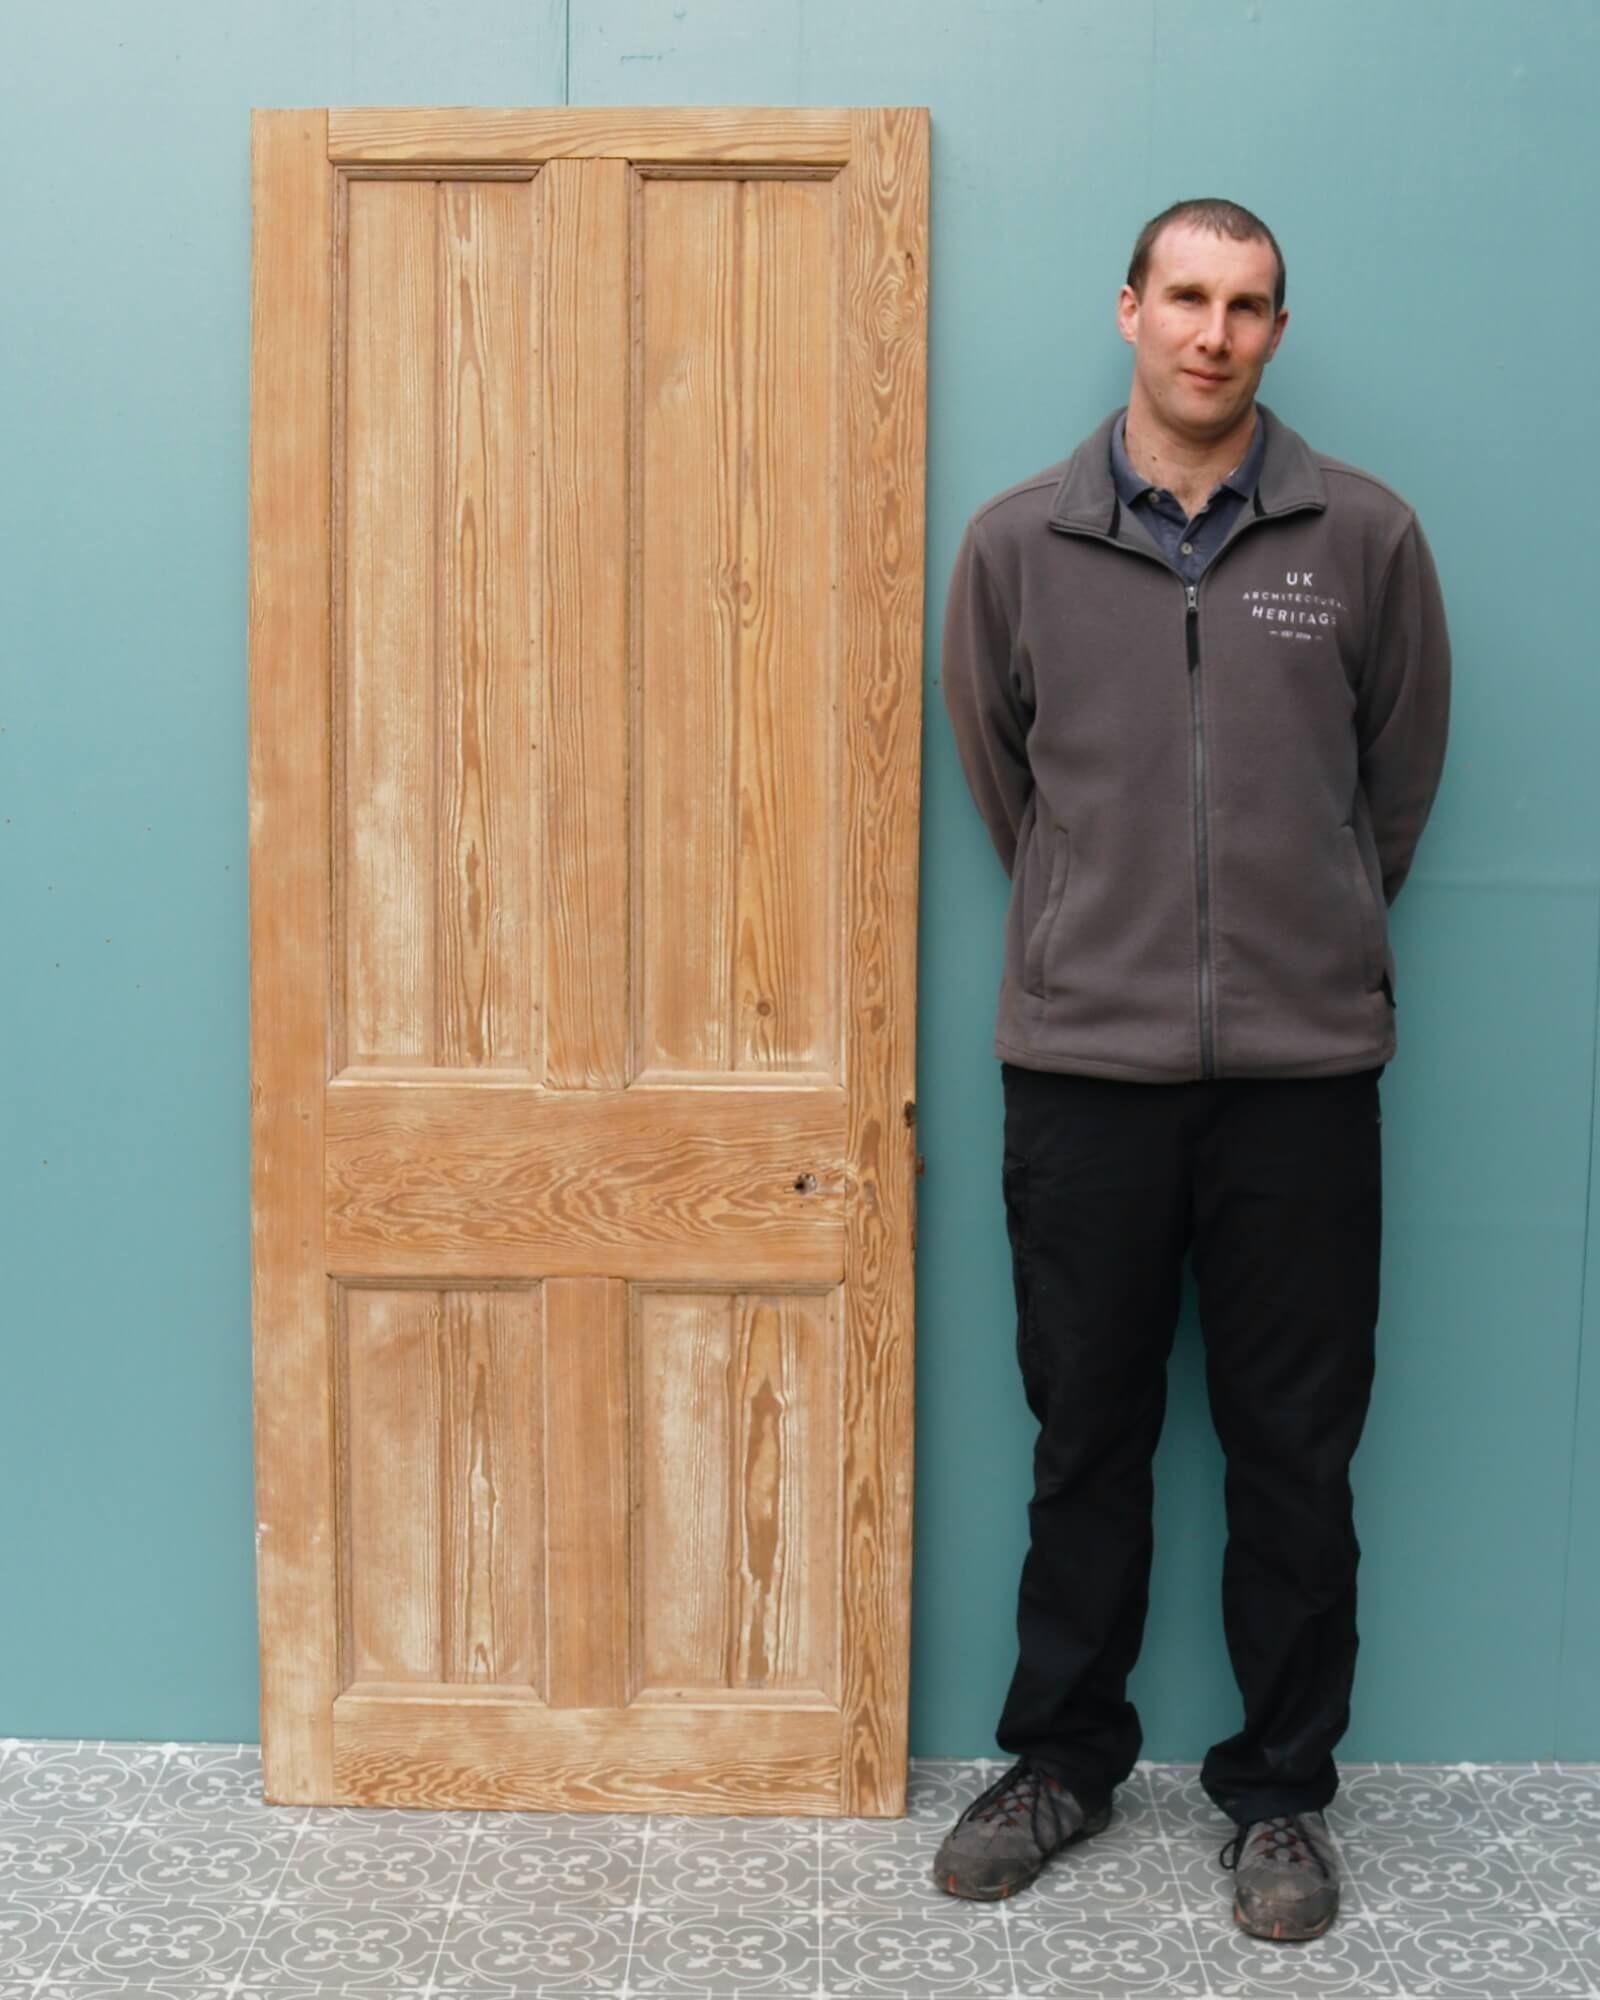 A sturdy pitch pine 4-panel door with a stripped finish. This reclaimed door is made from solid pitch pine that has a characteristic warm wood colour and attractive grain that looks handsome in any interior setting. It features 4 panels to both the